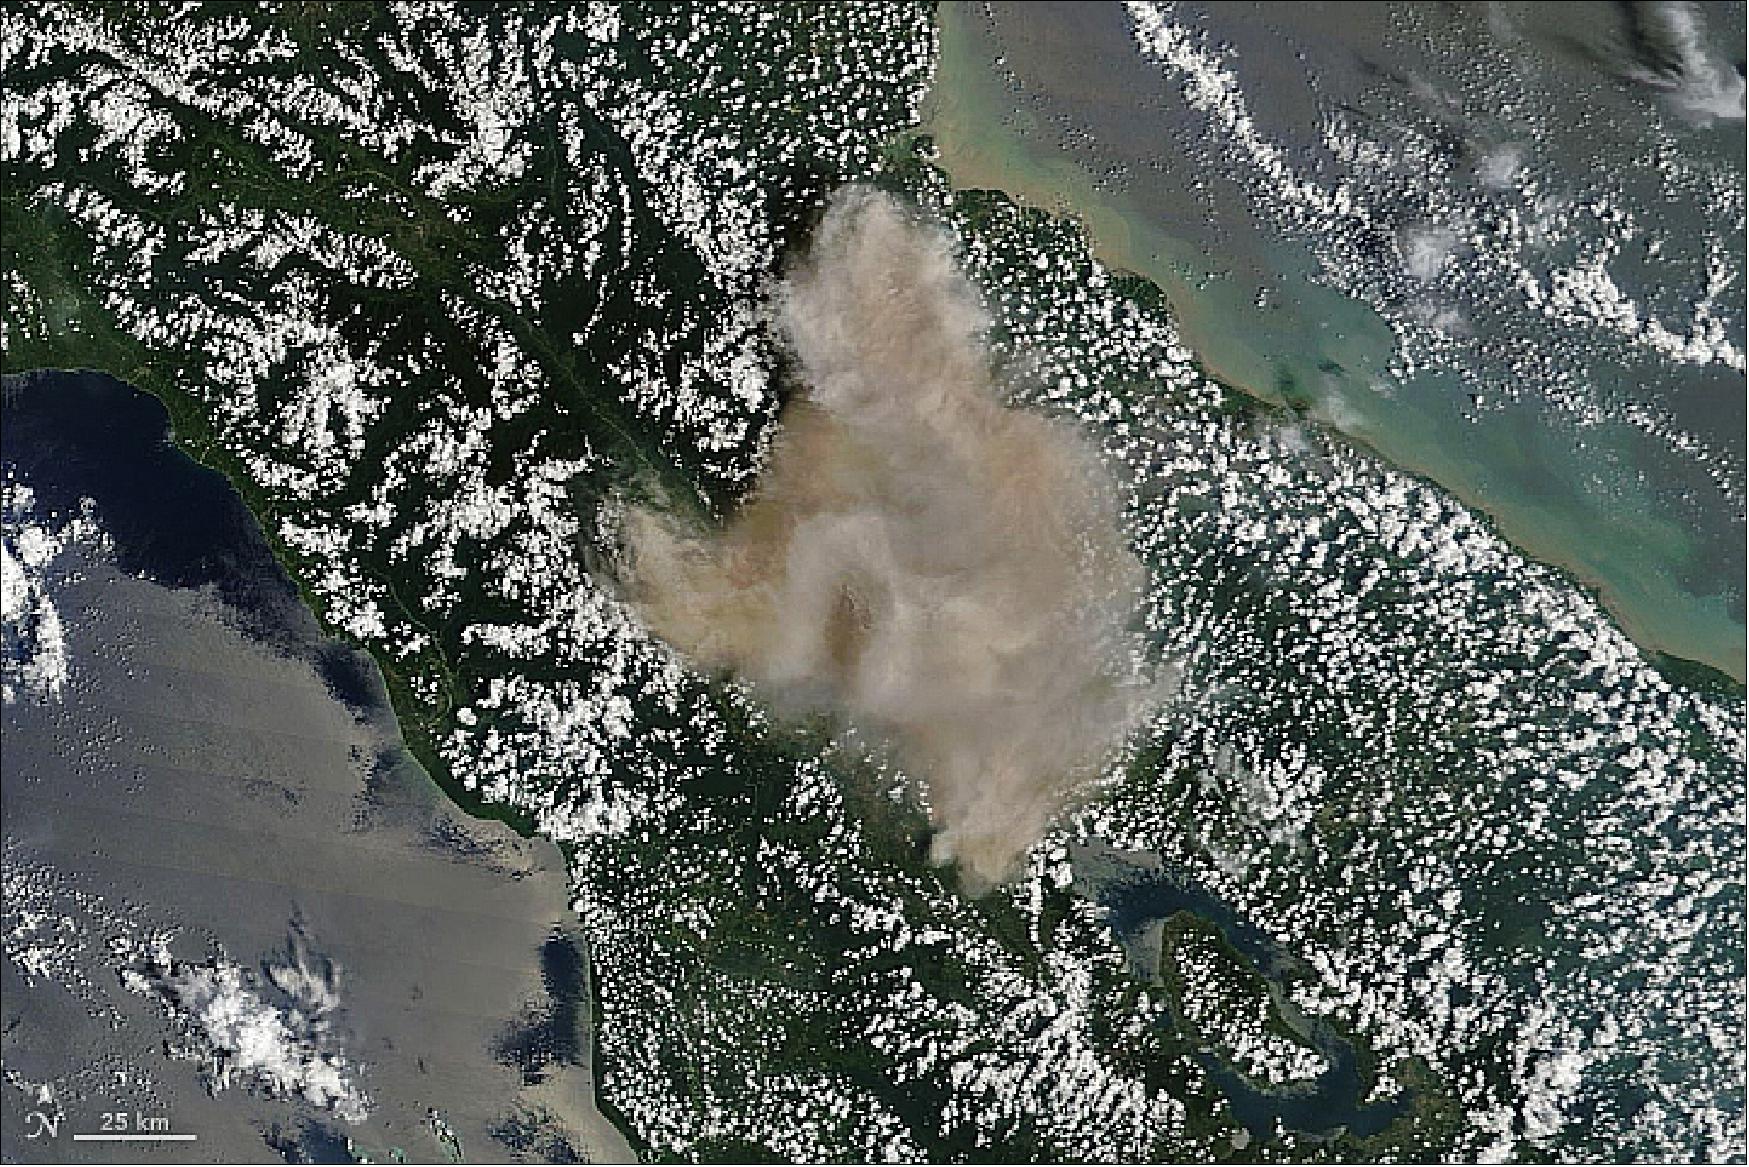 Figure 33: MODIS image on Terra, acquired on 19 Feb. 2018, showing the massive smoke-and-ash column of Mount Sinabung on the island of Sumatra (image credit: NASA Earth Observatory, images by Joshua Stevens, using MODIS data from LANCE/EOSDIS Rapid Response, Story by Mike Carlowicz)